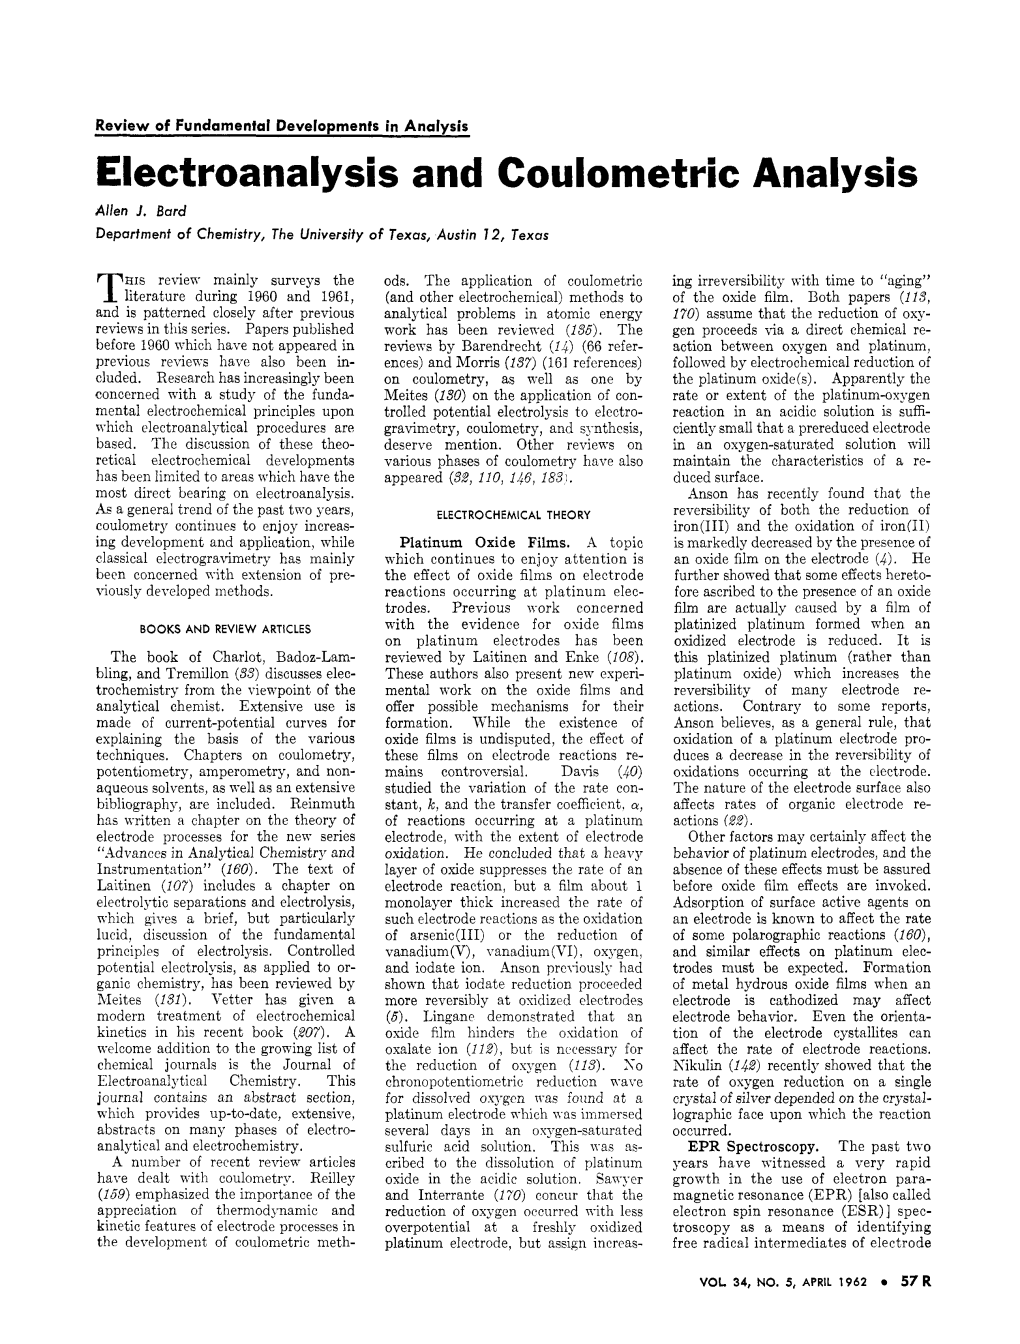 Electroanalysis and Coulometric Analysis Allen J